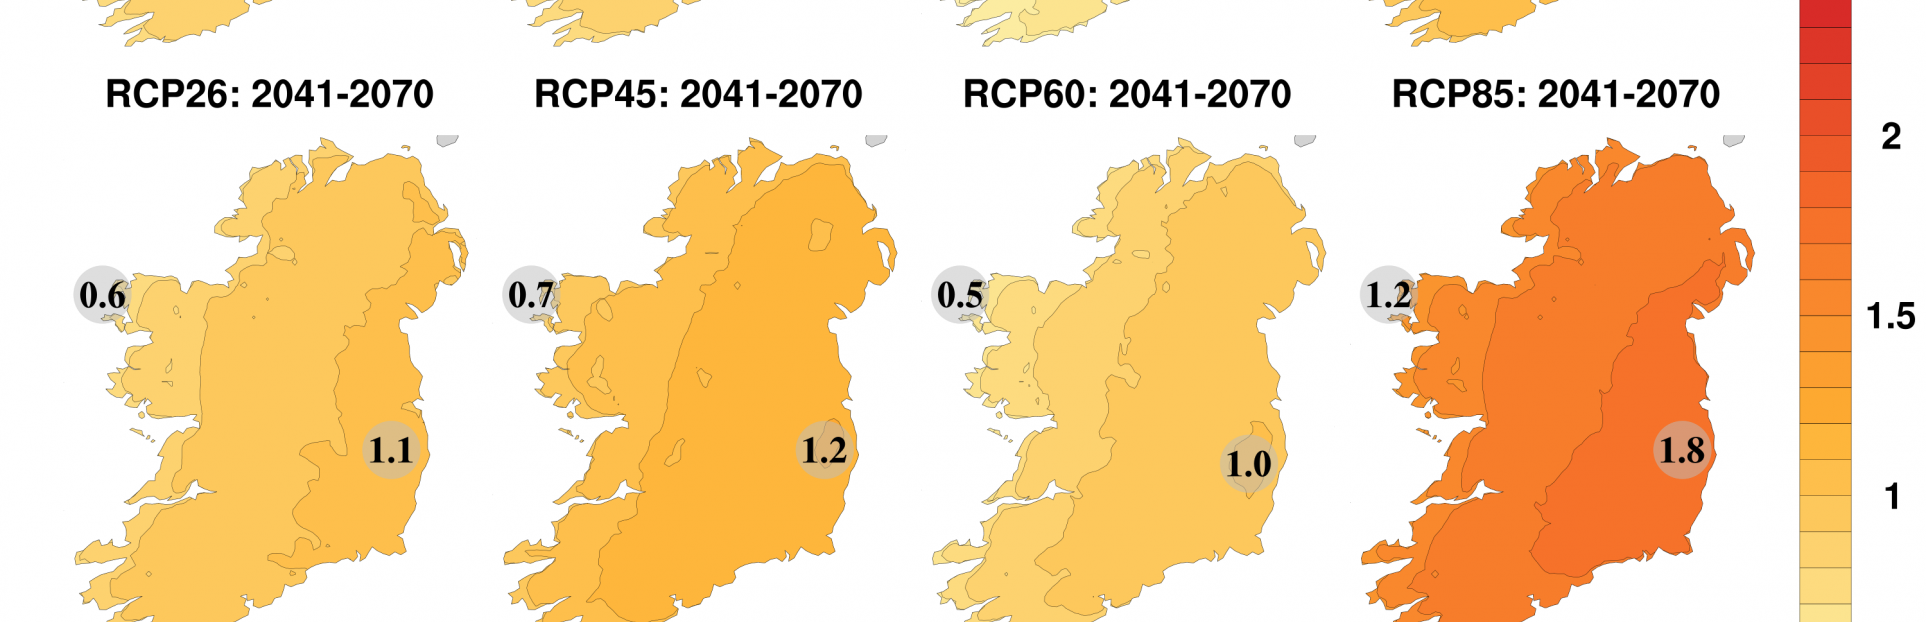 New Climate Report for Ireland Indicates Dramatic Changes in Climate by